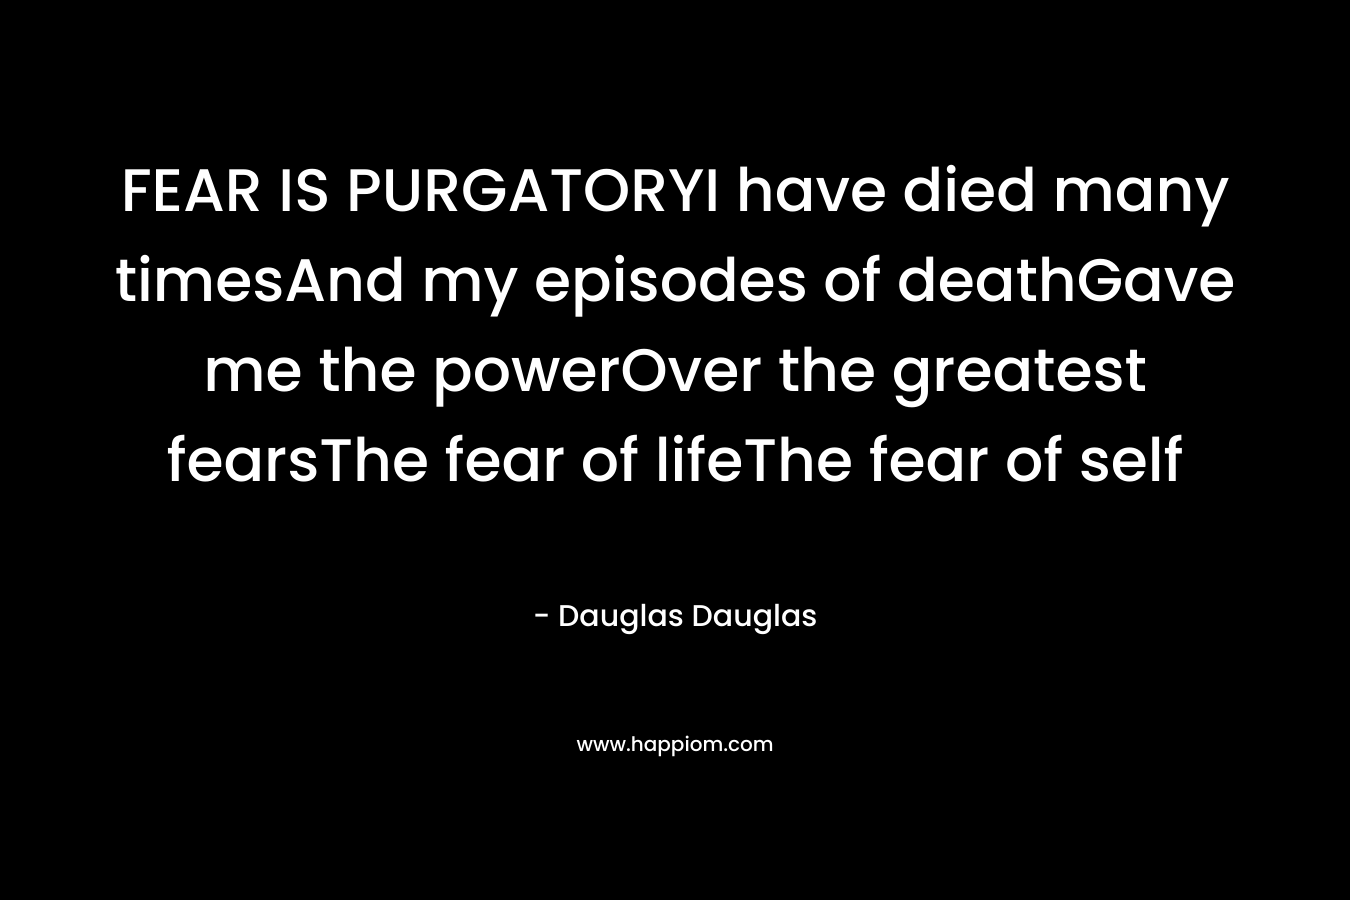 FEAR IS PURGATORYI have died many timesAnd my episodes of deathGave me the powerOver the greatest fearsThe fear of lifeThe fear of self – Dauglas Dauglas